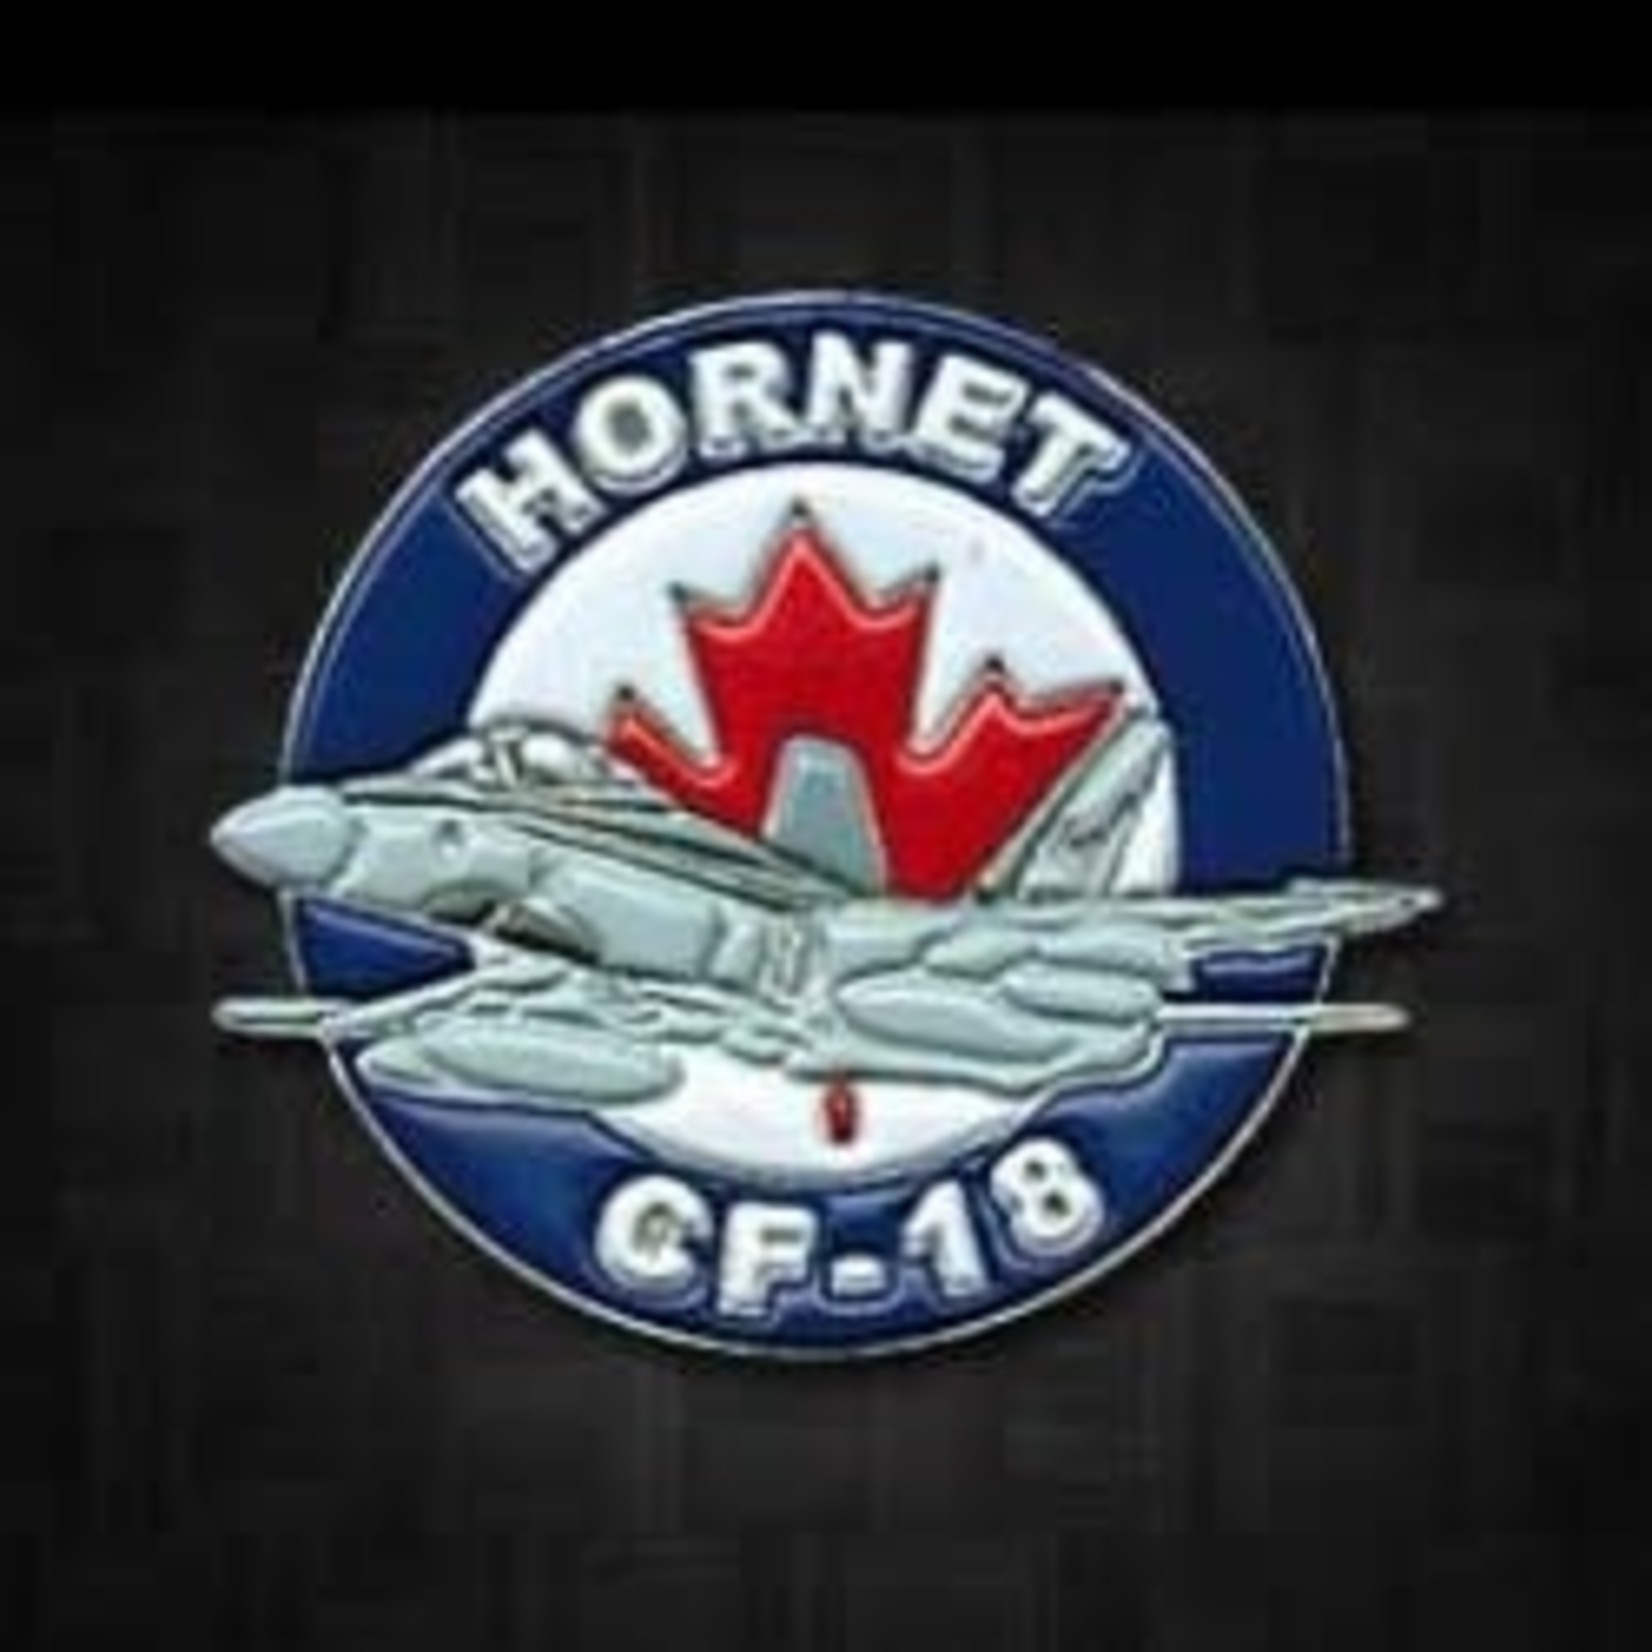 Aviation and Space CF-18 Hornet Roundel Lapel Pin